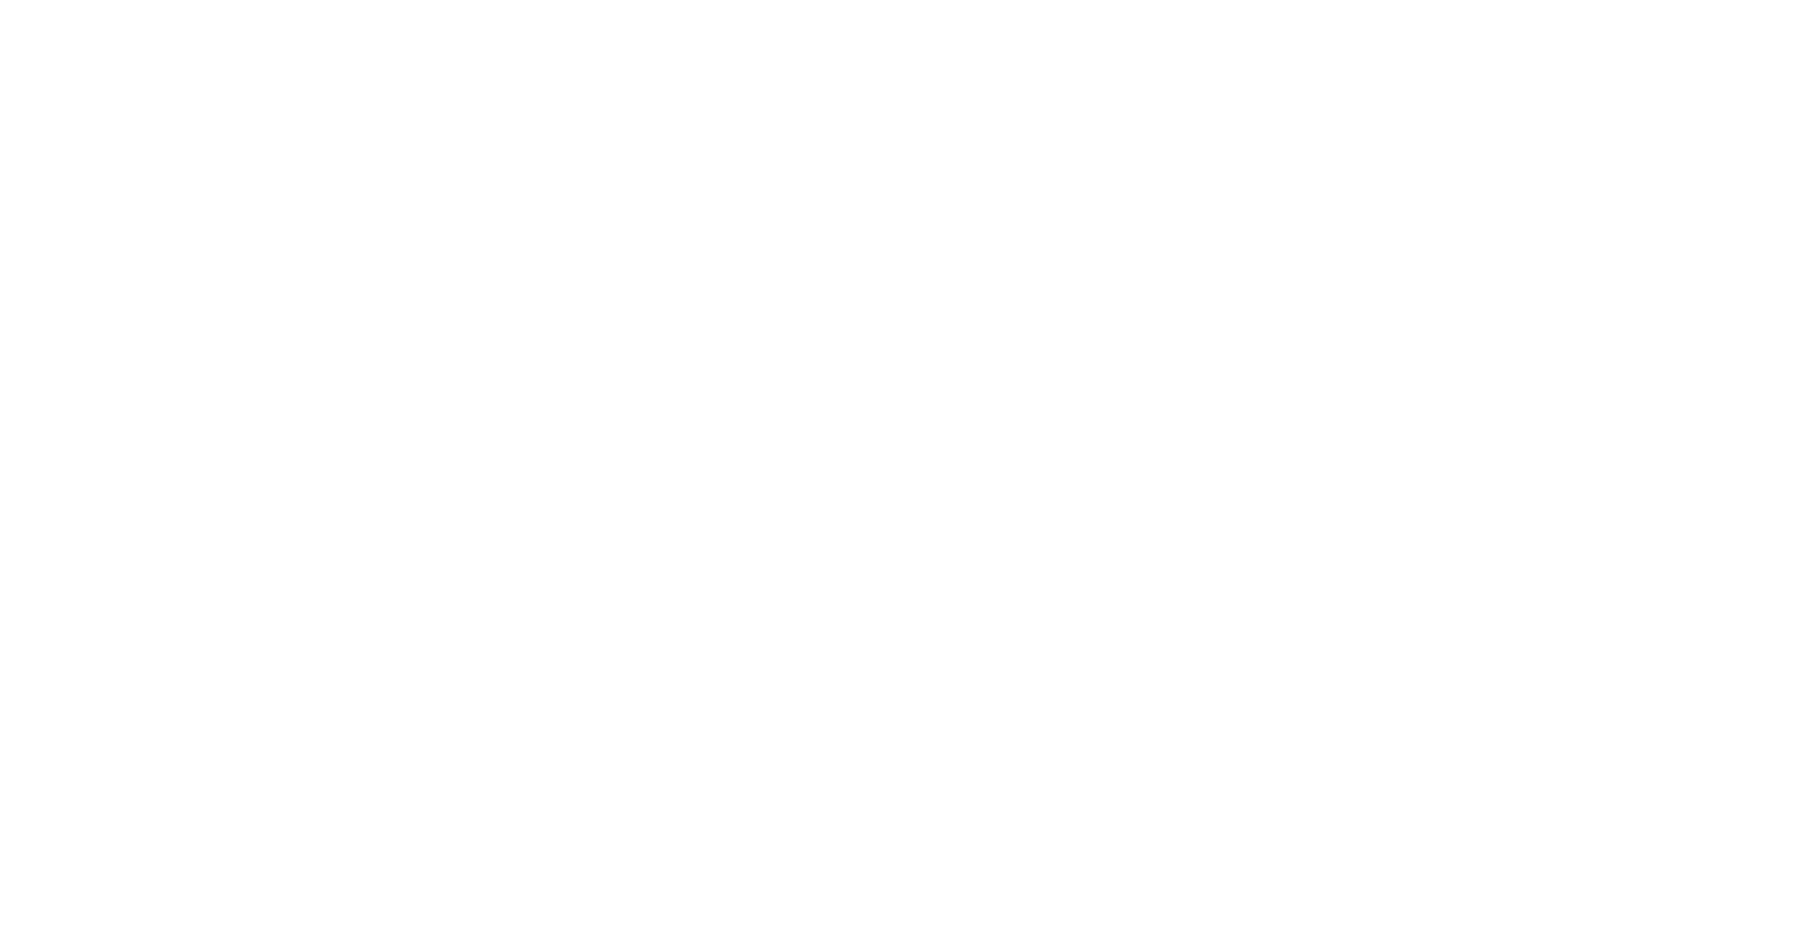 In Their Own Words: The Grossman Legacy